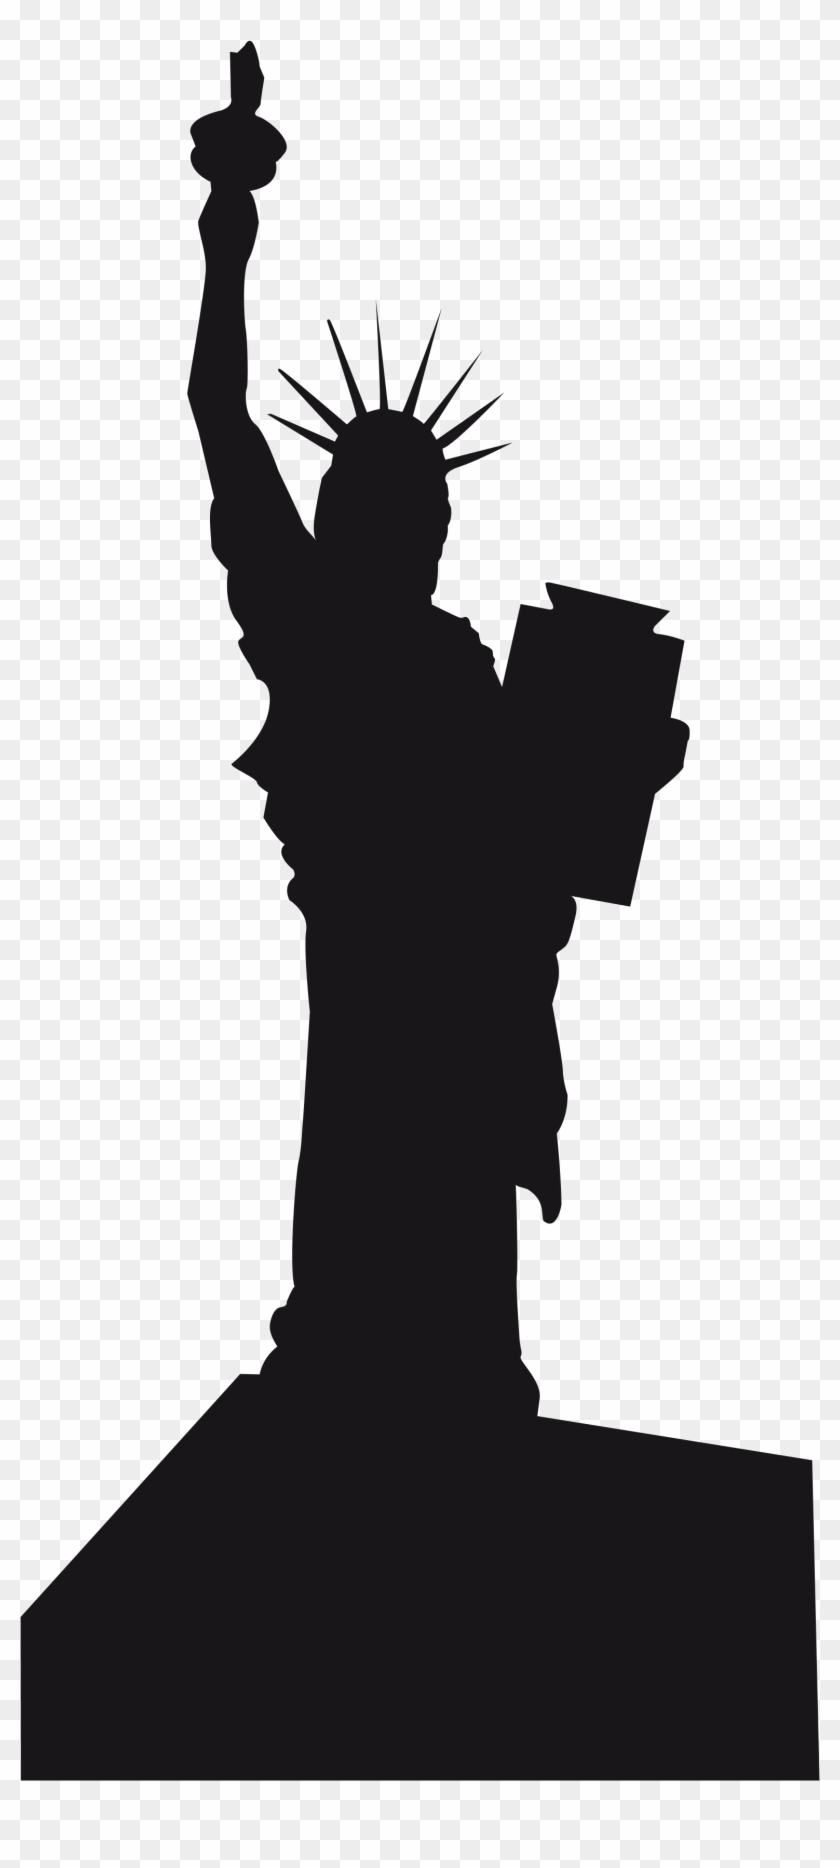 Open - Statue Of Liberty Silhouette Svg Clipart #554128